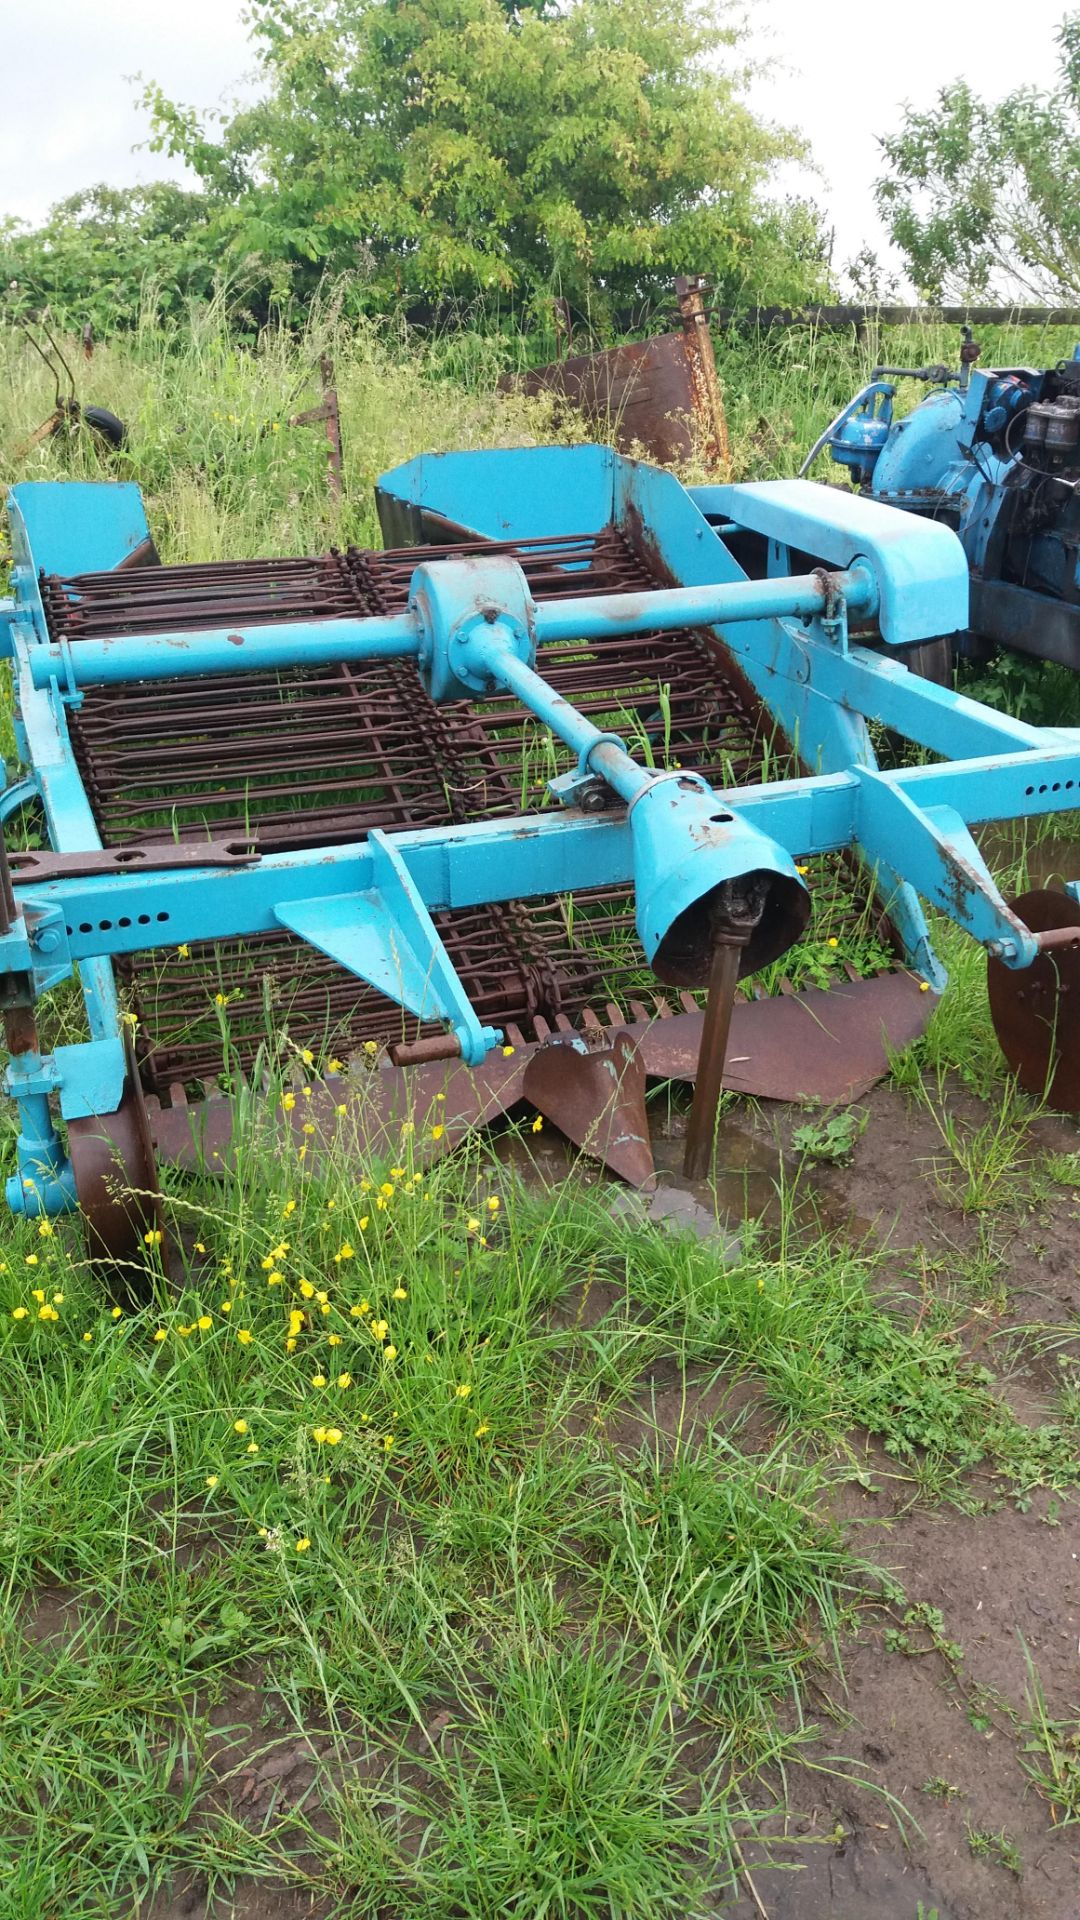 Ransome two row potato hoover in good reconditioned order. Stored near Bardwell.